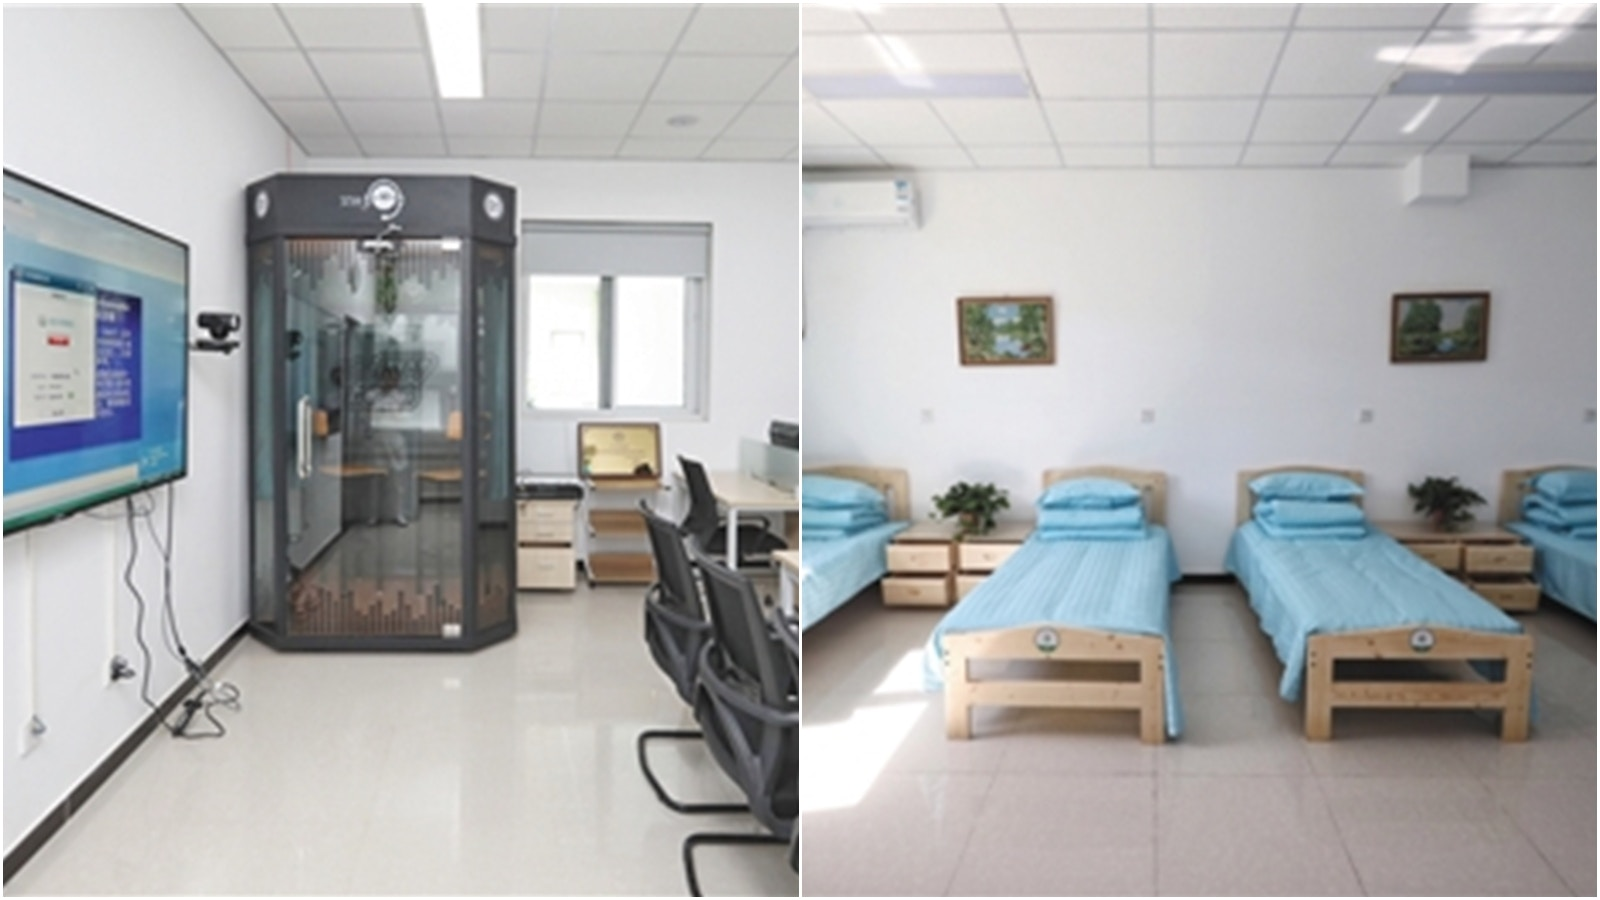 The new clinic has a karaoke booth (left) and allows families to stay with patients (right) during a rehab program that lasts four to six months. (Picture: The Beijing News)